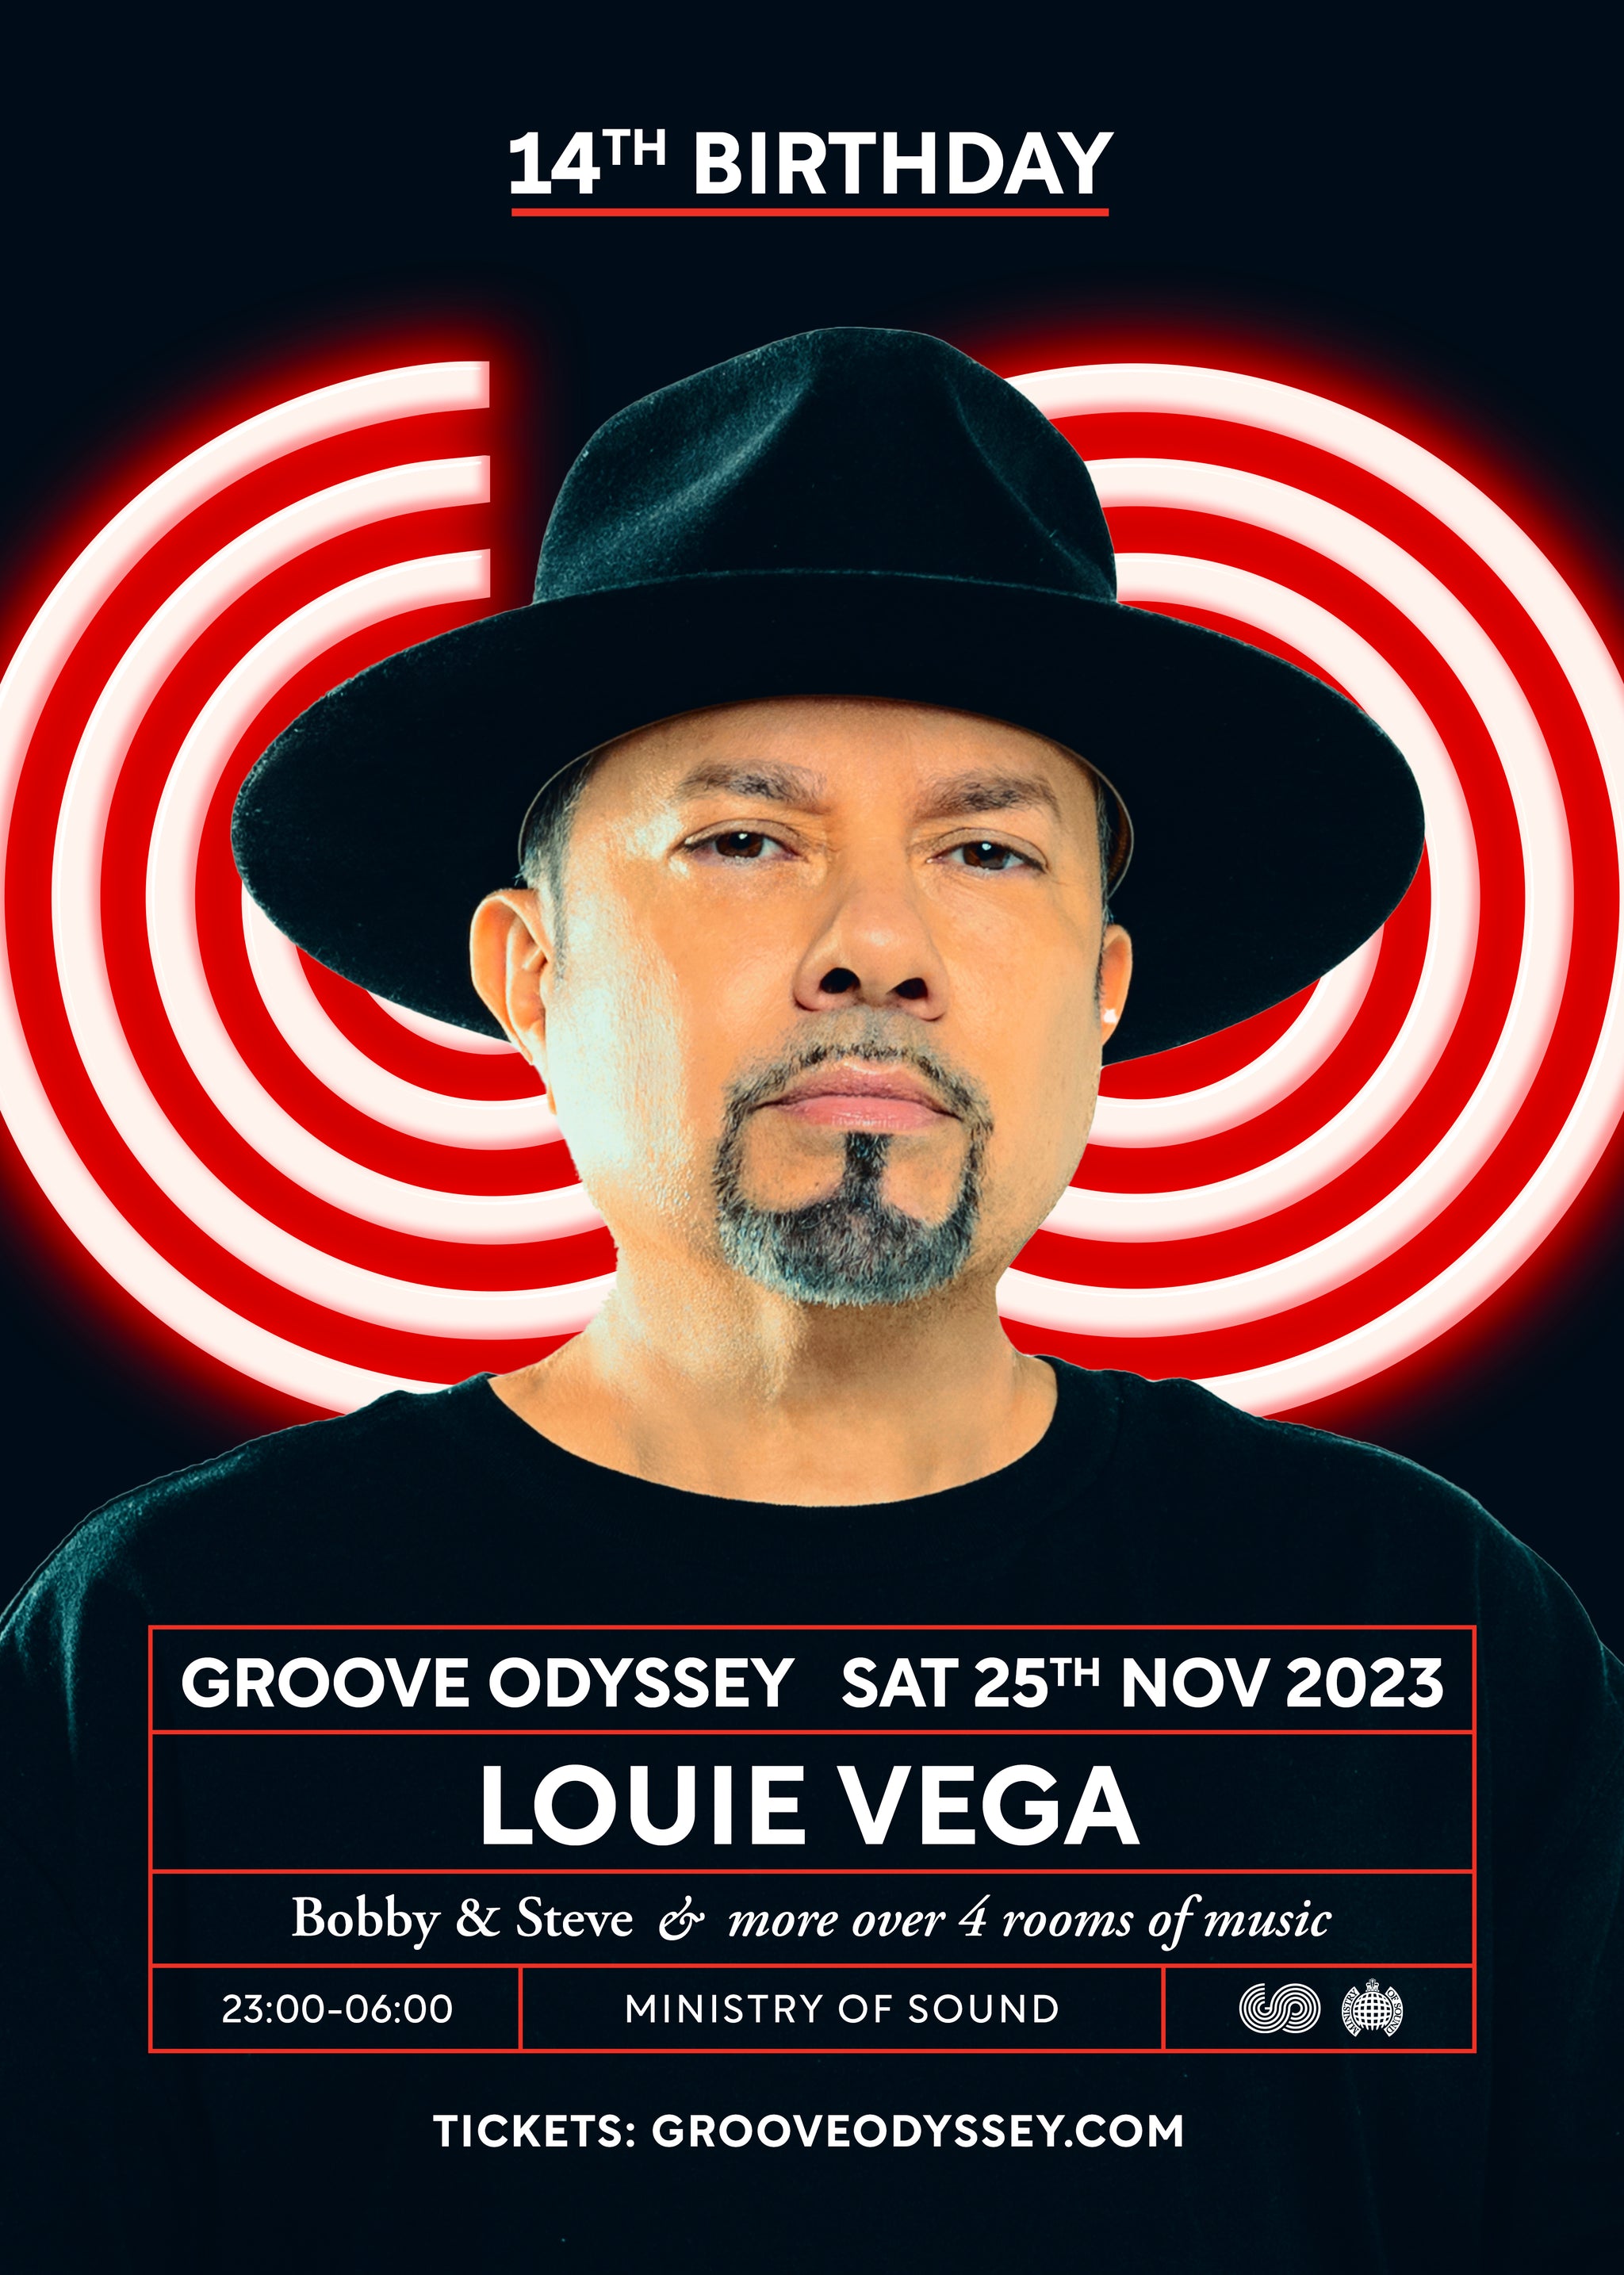 Groove Odyssey 14th